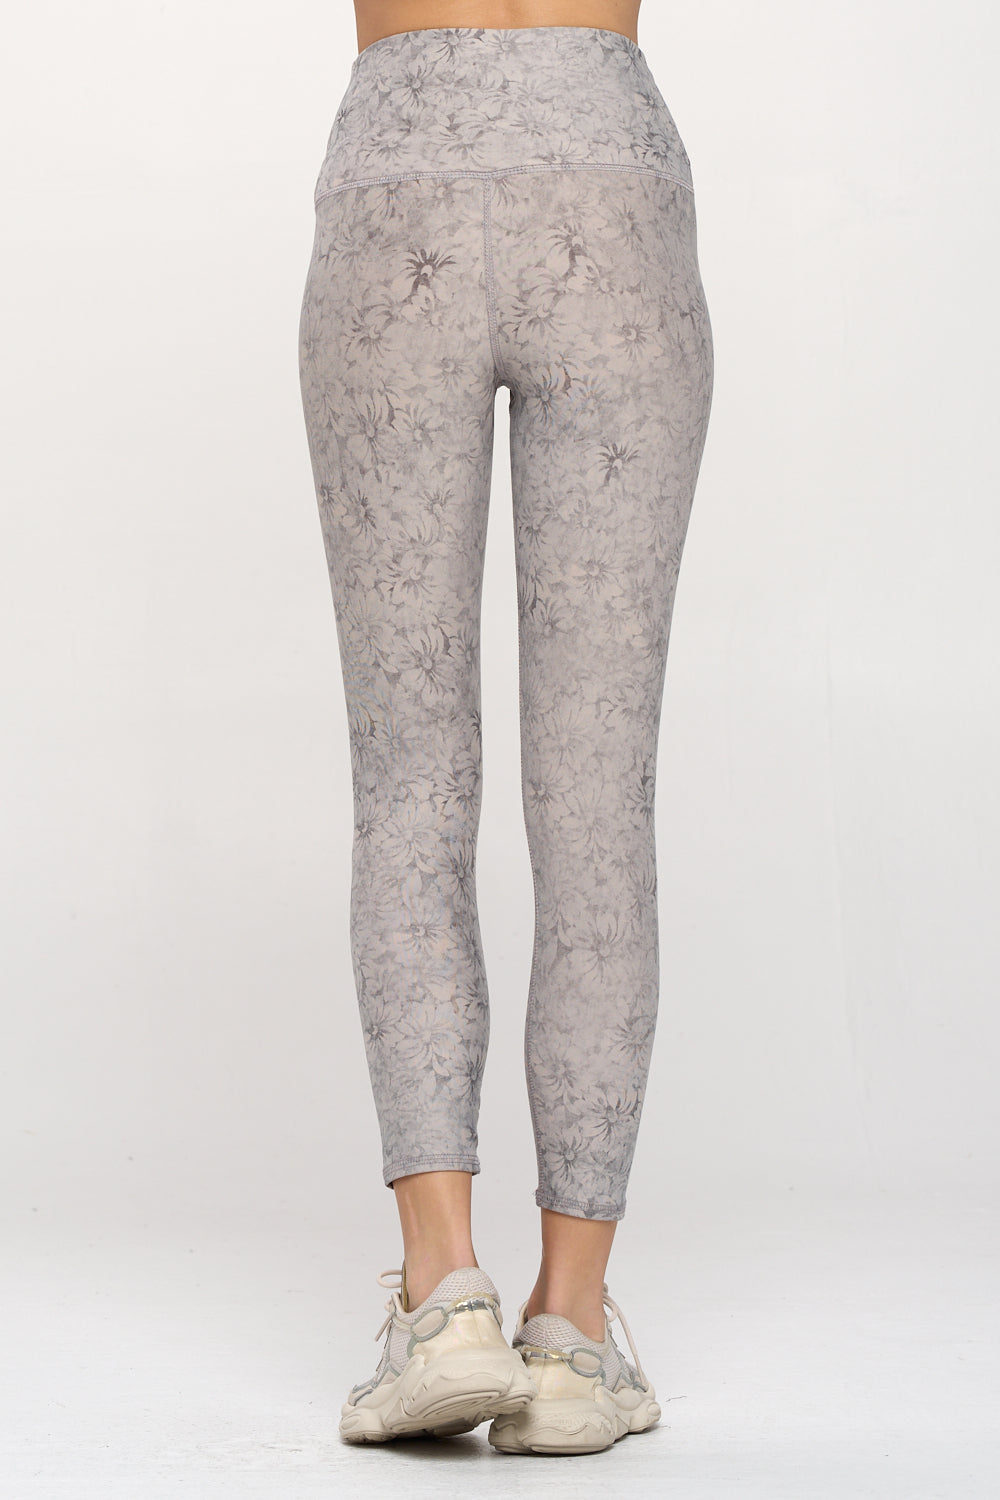 Mia - Dove Faded Floral Stamp 7/8 Legging (High-Waist)